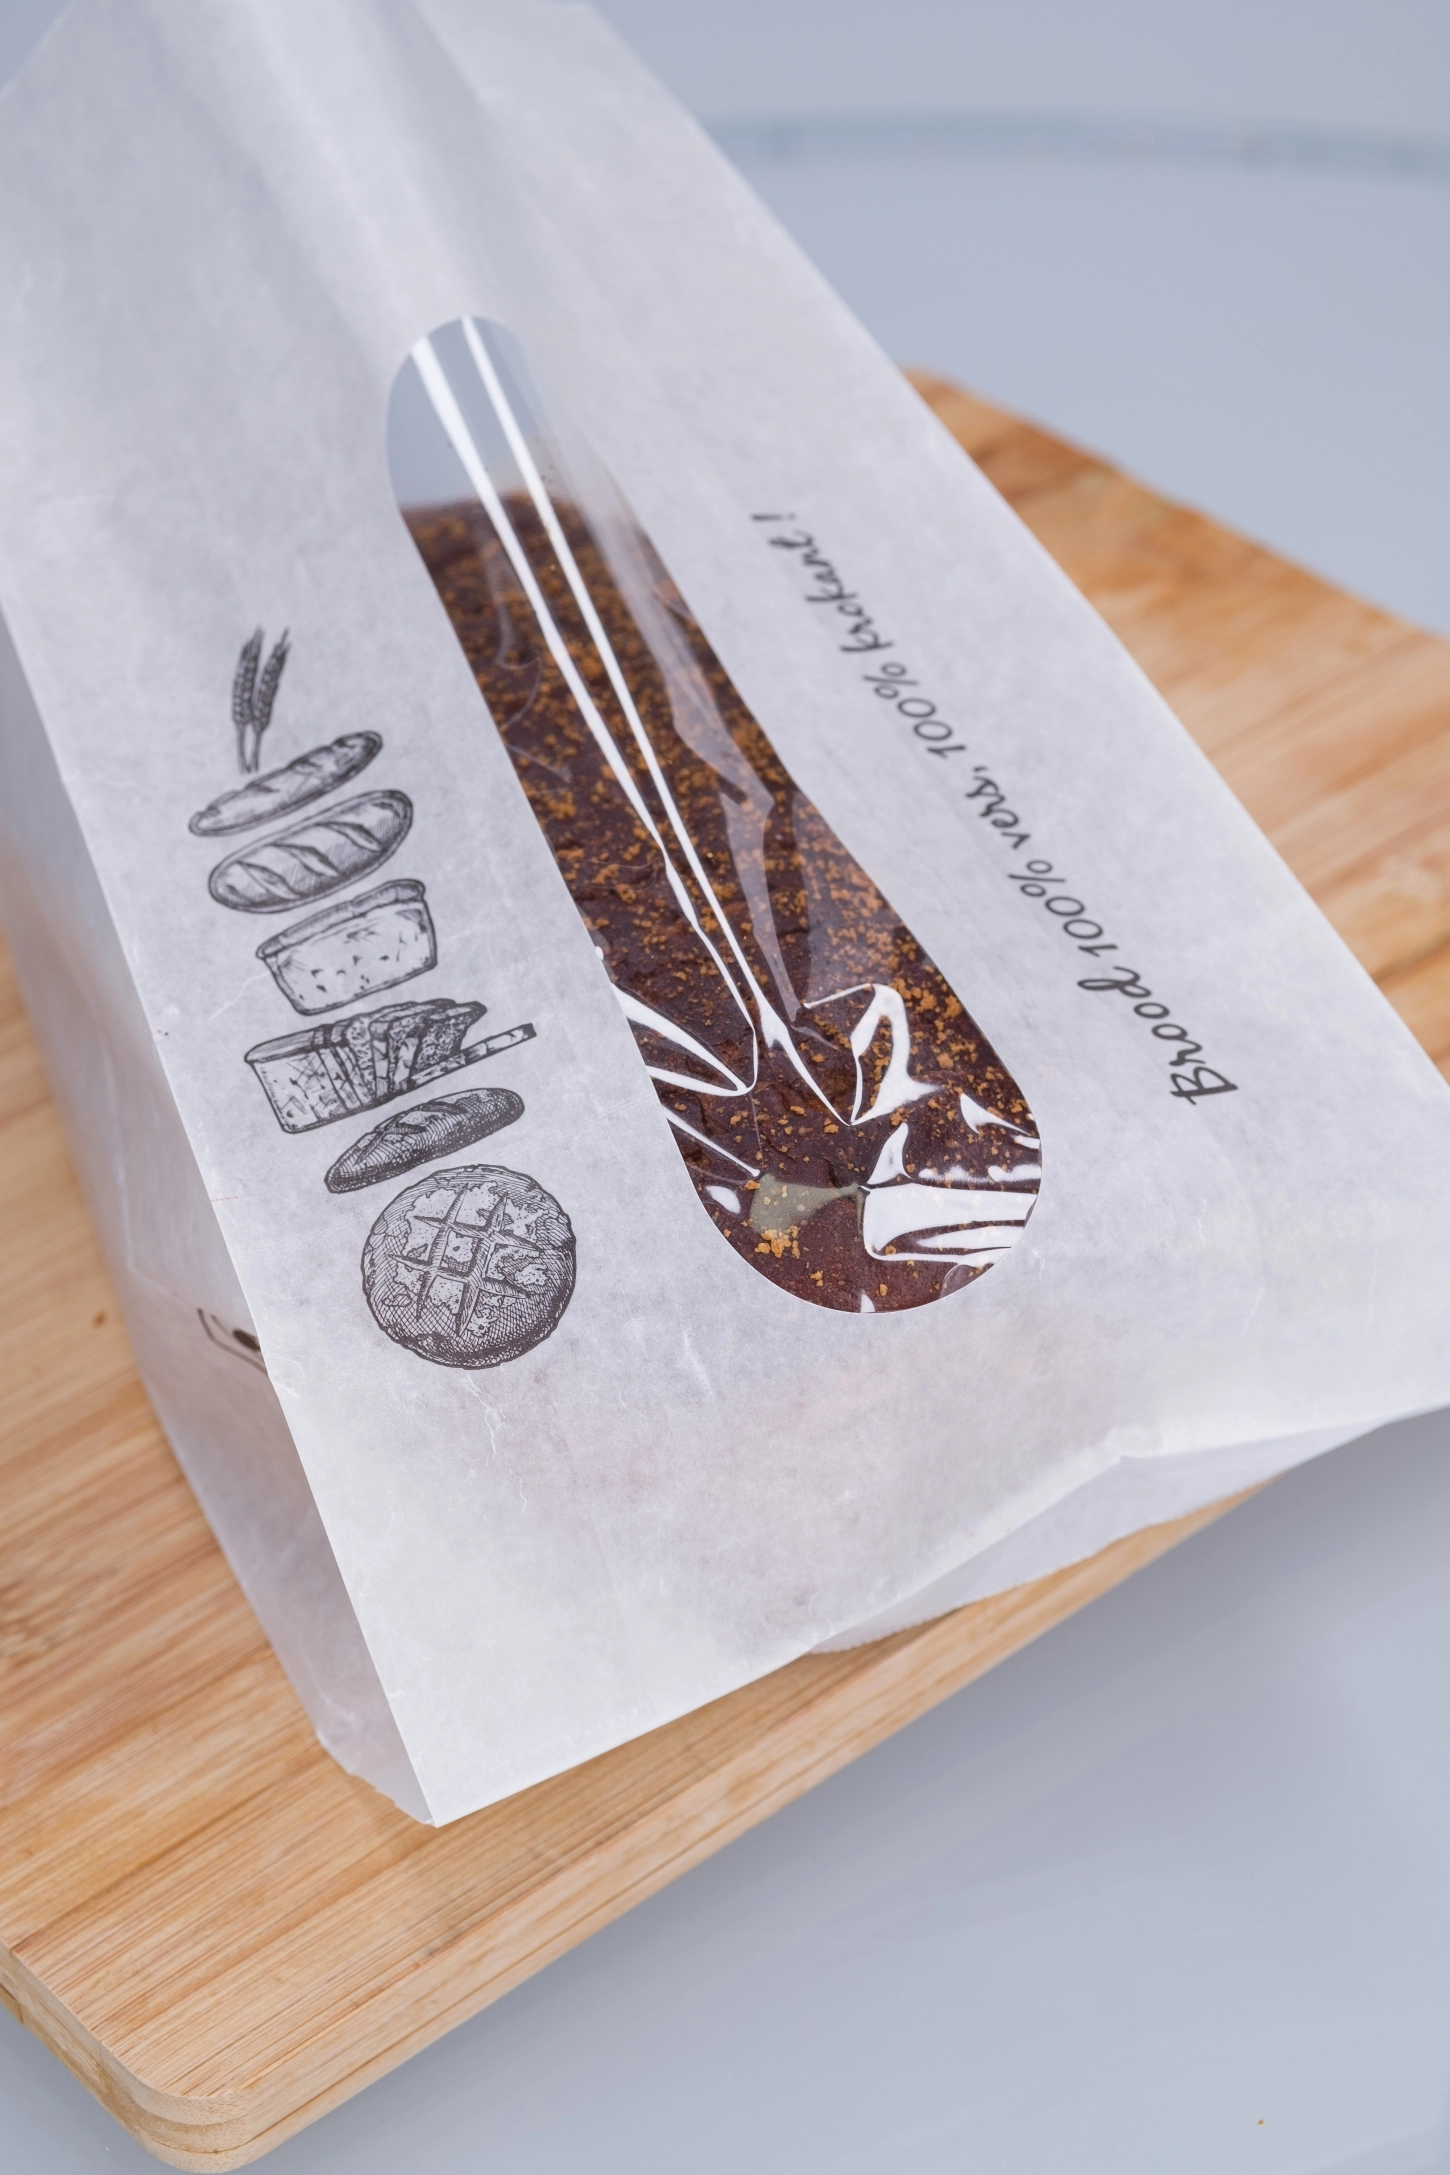 Customized packaging for bread.